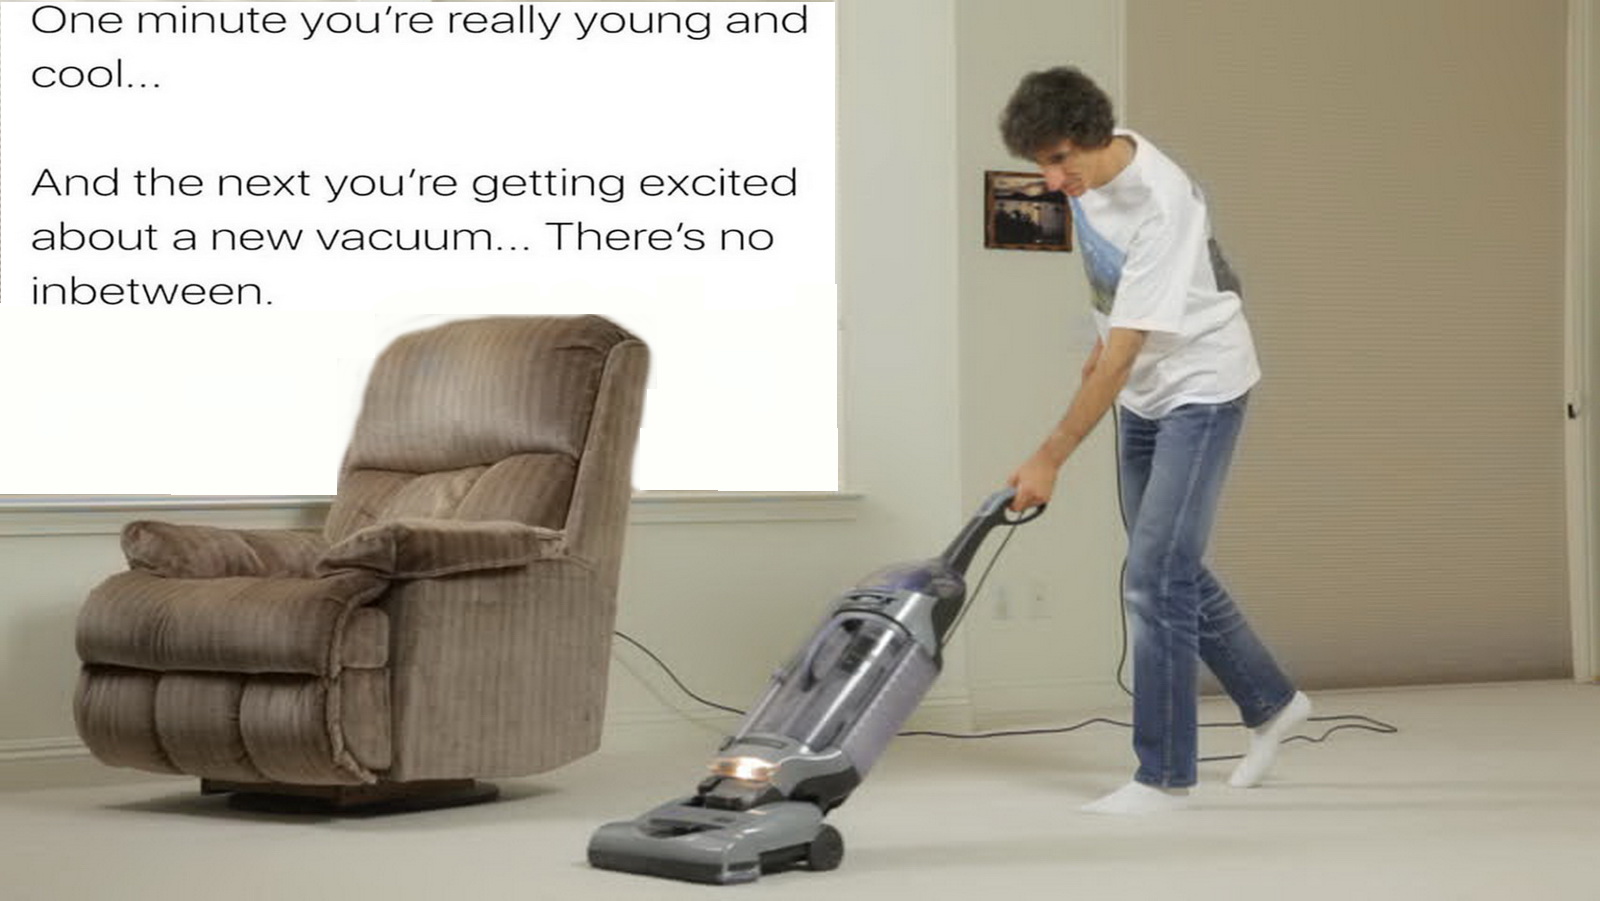 vacuum cleaner - One minute you're really young and cool... And the next you're getting excited about a new vacuum... There's no inbetween.